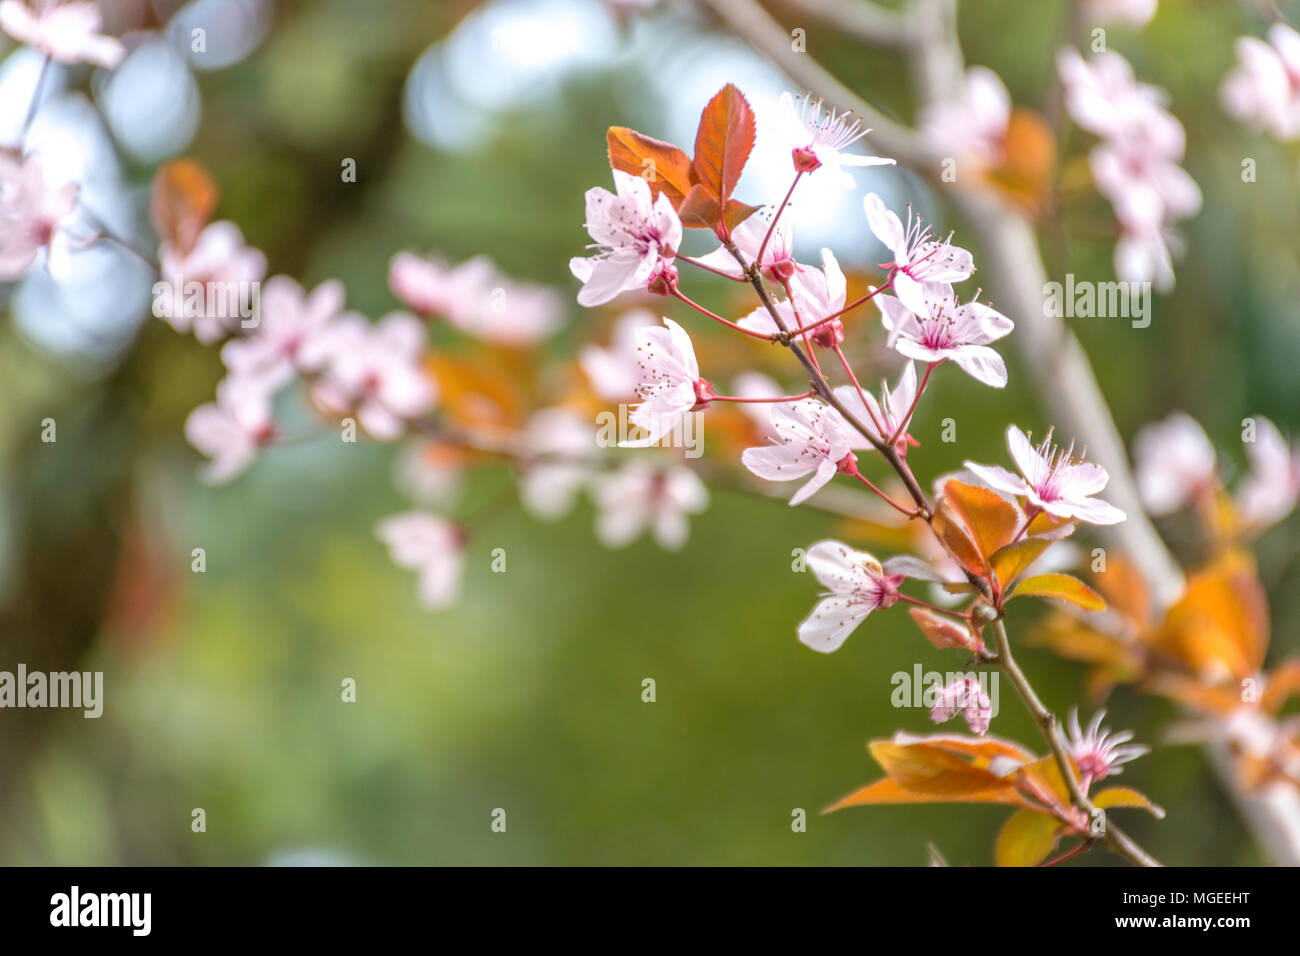 Closeup of the branch of an almond tree in full bloom Stock Photo